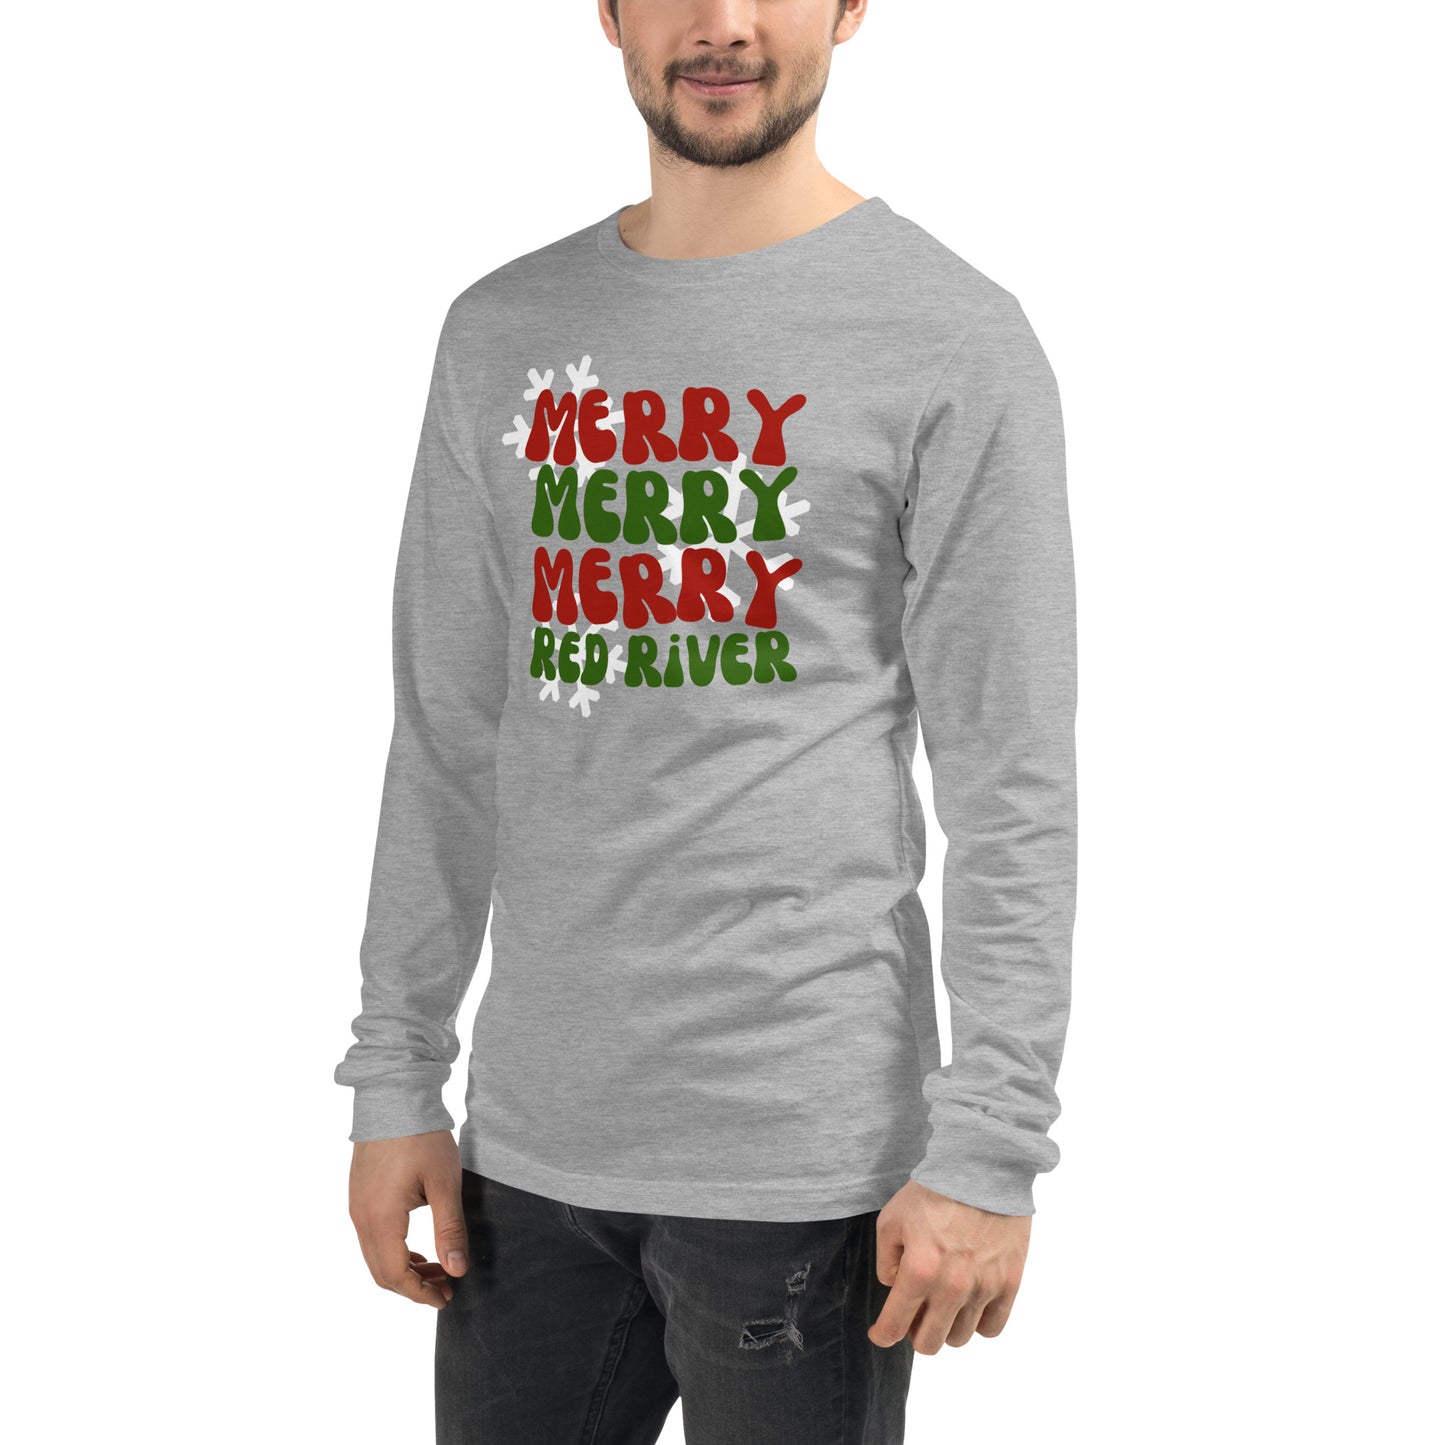 Merry Red River Holiday Snow Red Green Long Sleeve T-Shirt